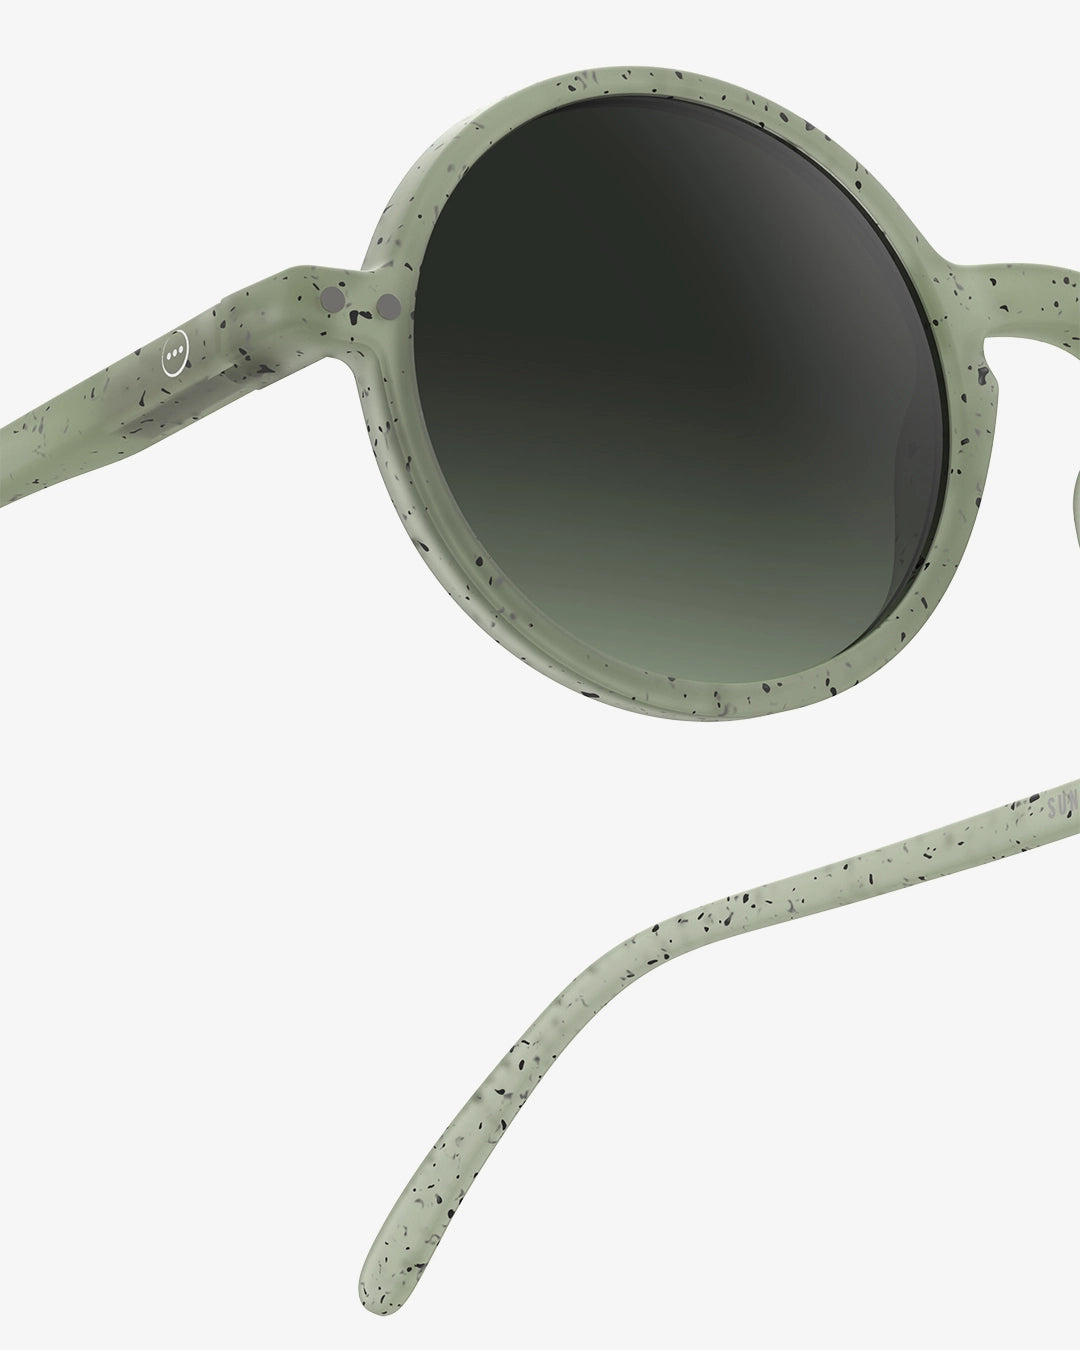 #G Sunglasses - Dyed Green